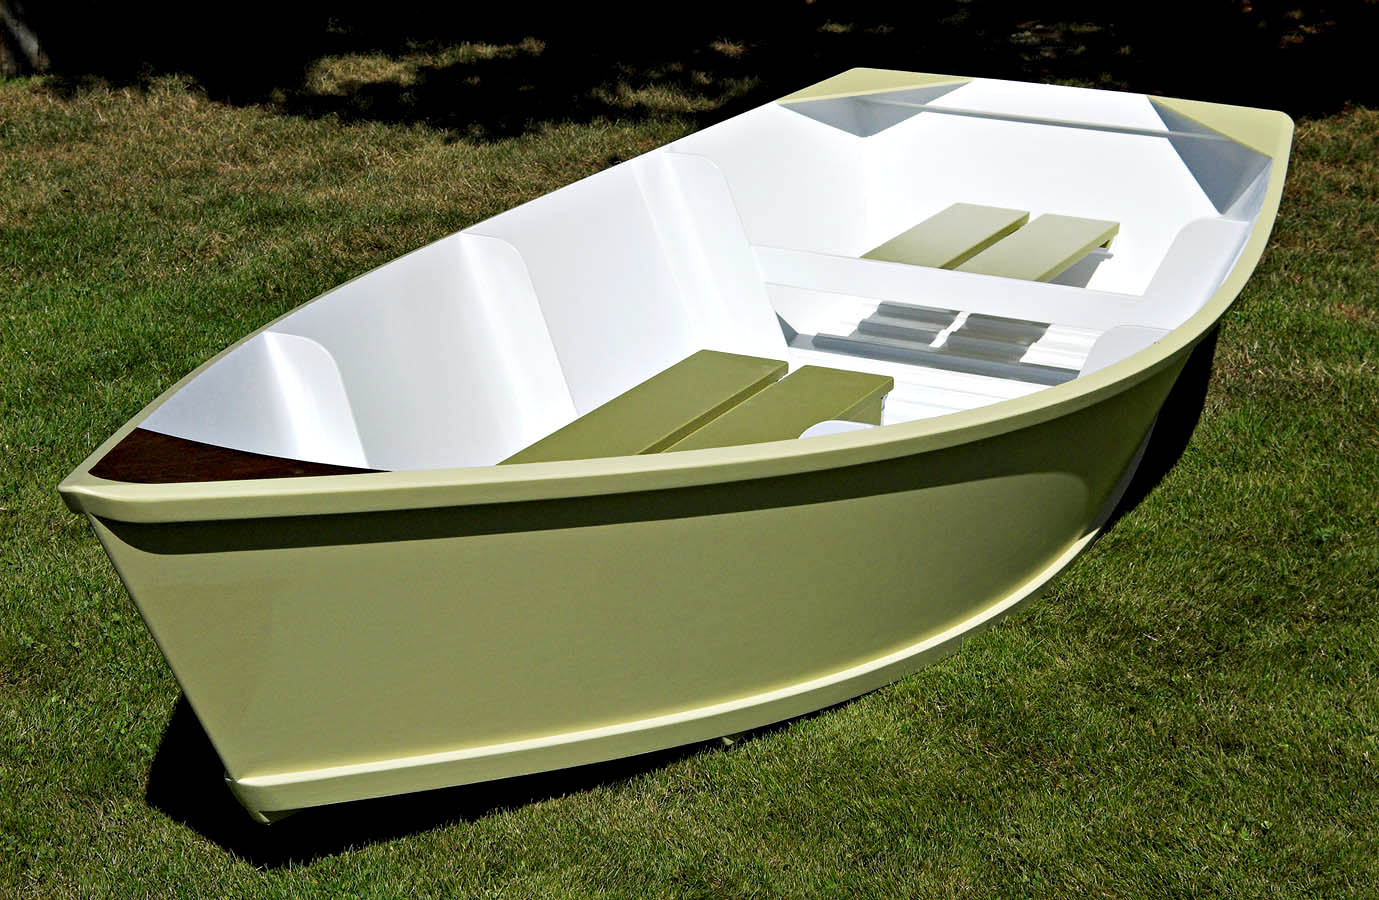  plan for small plywood boats small plywood boats diy boat hoist plans